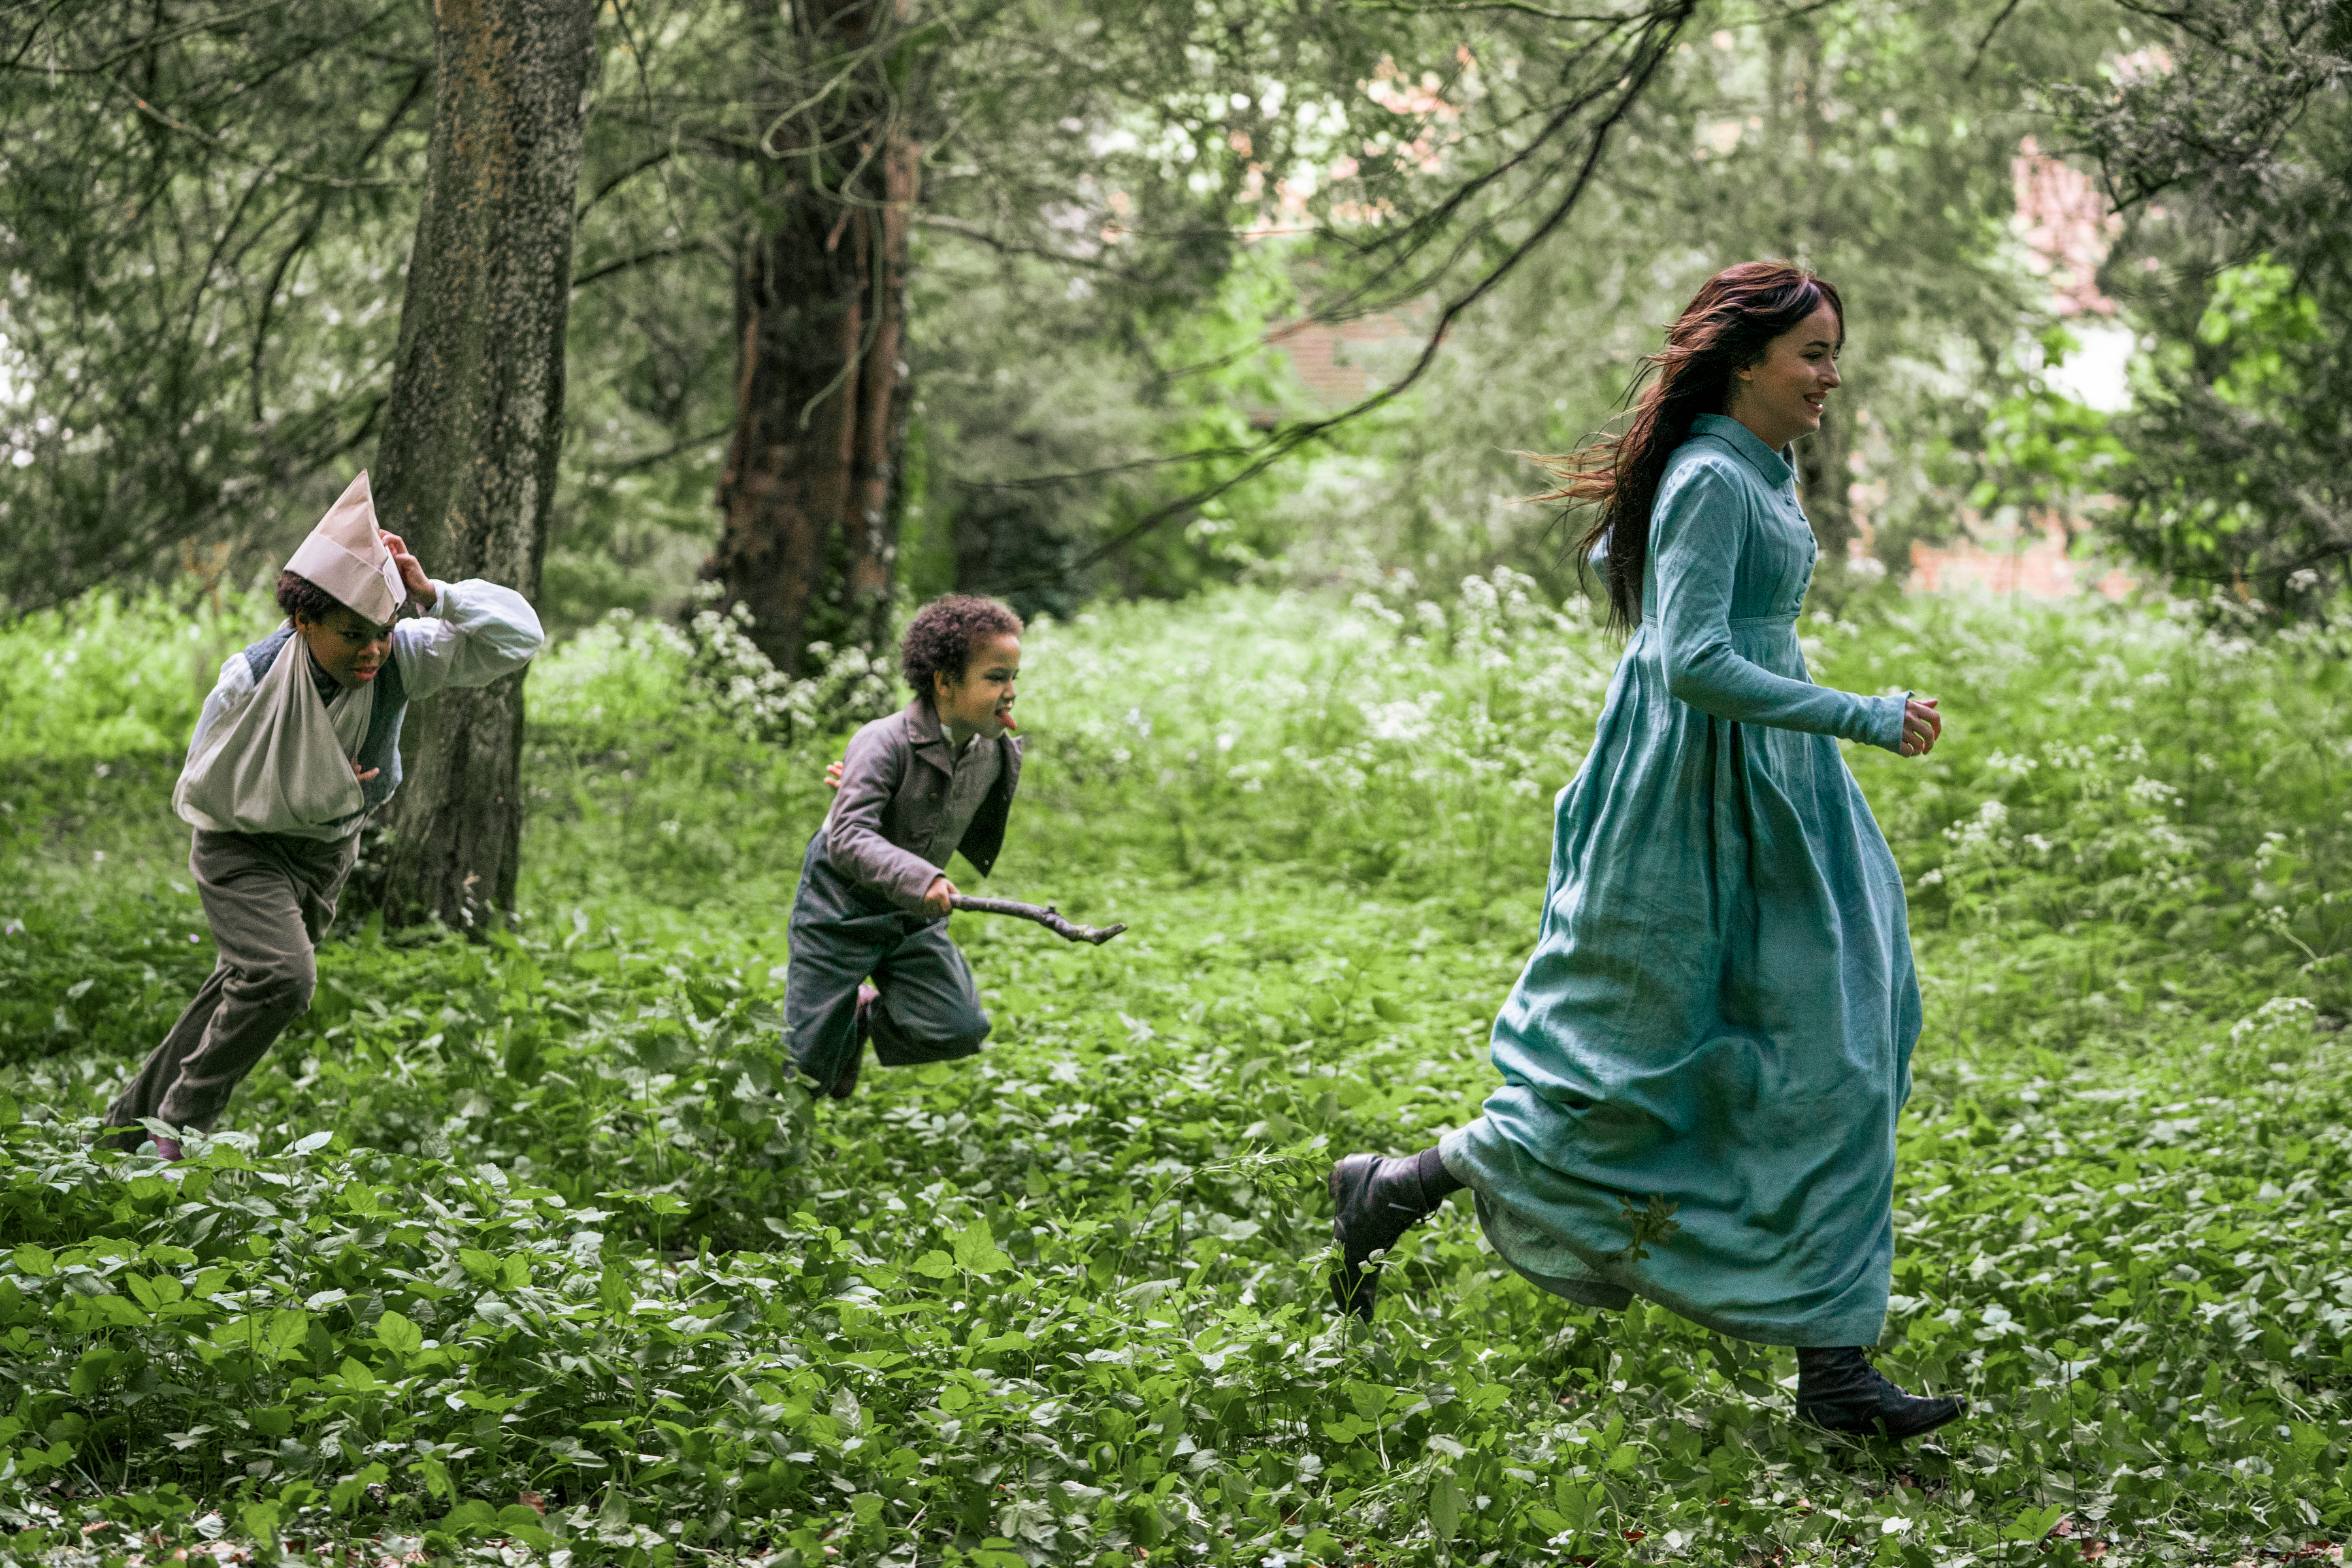 A group of children in paper hats chase a woman in a long Regency gown through the forest. They are all laughing.